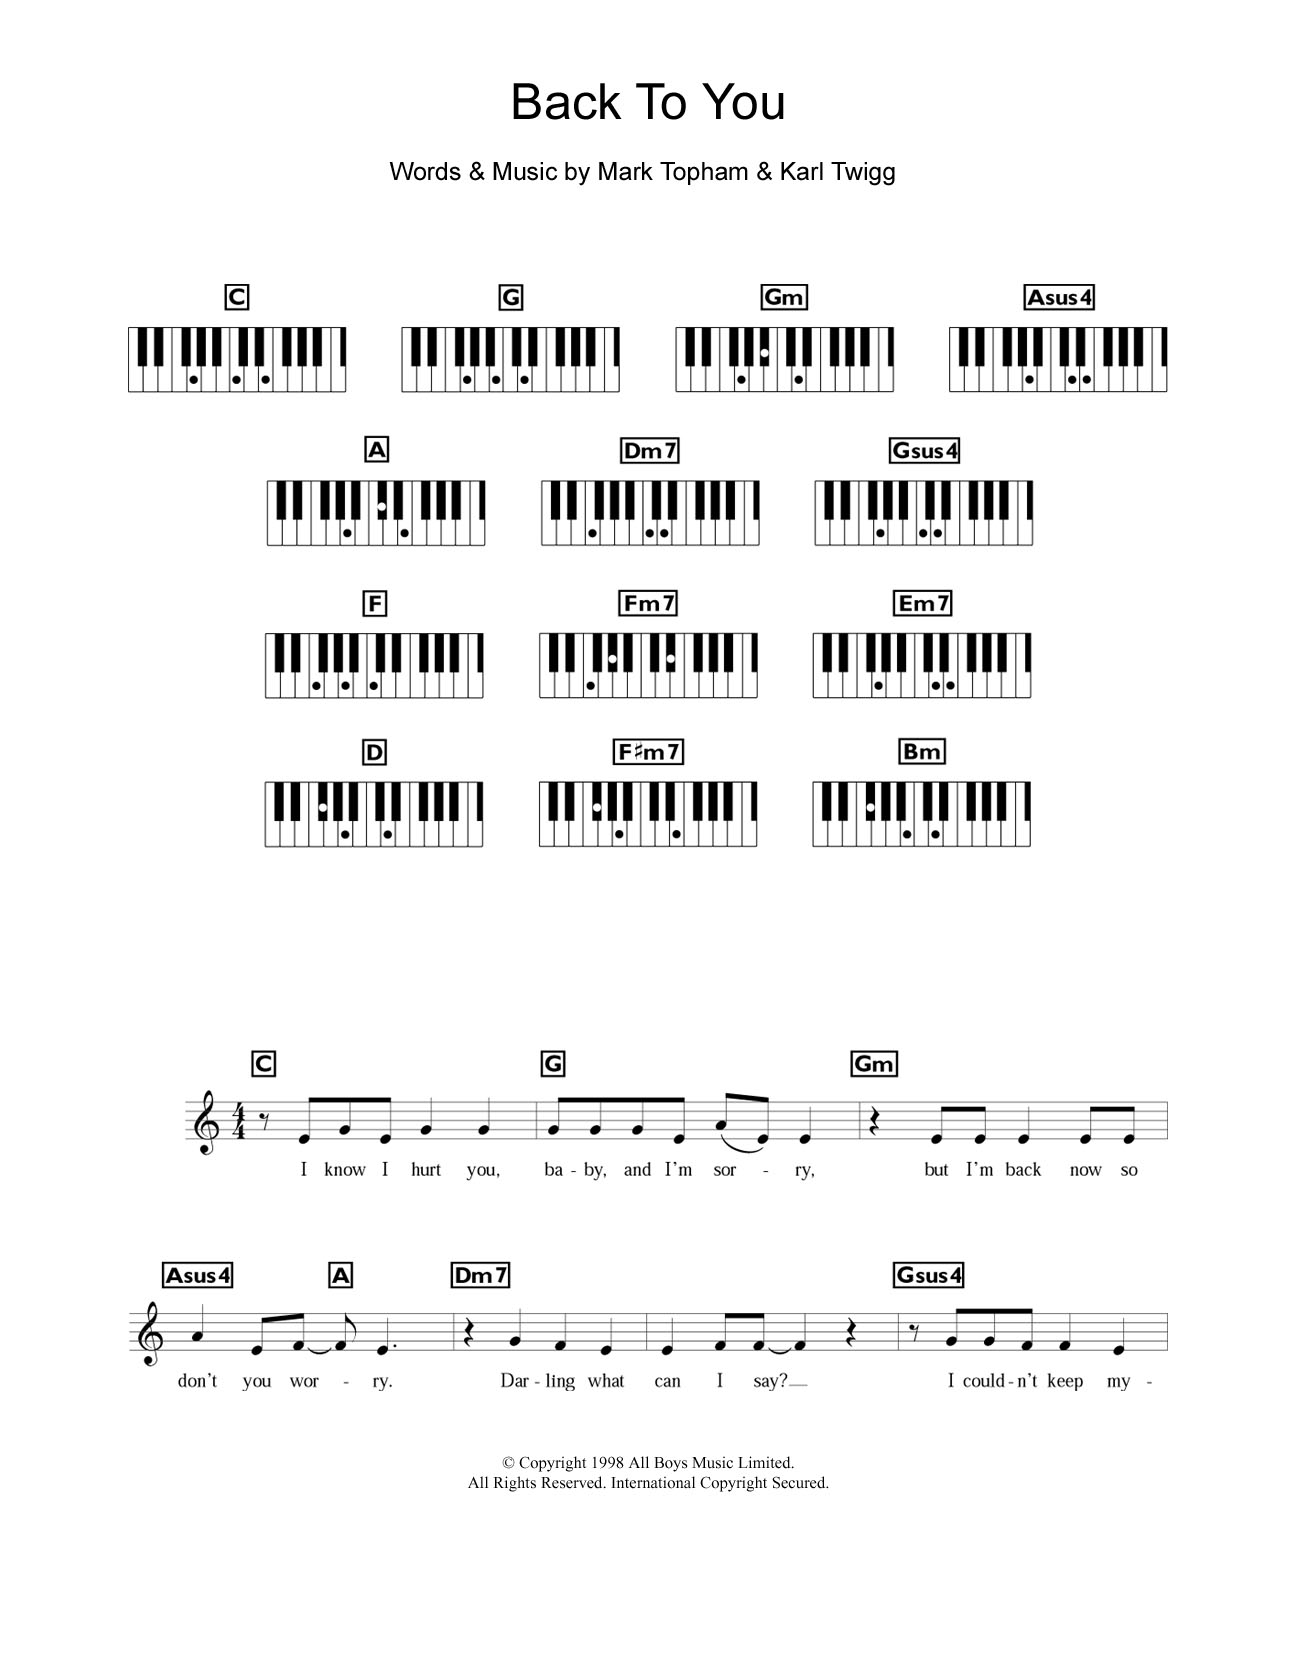 Download Steps Back To You Sheet Music